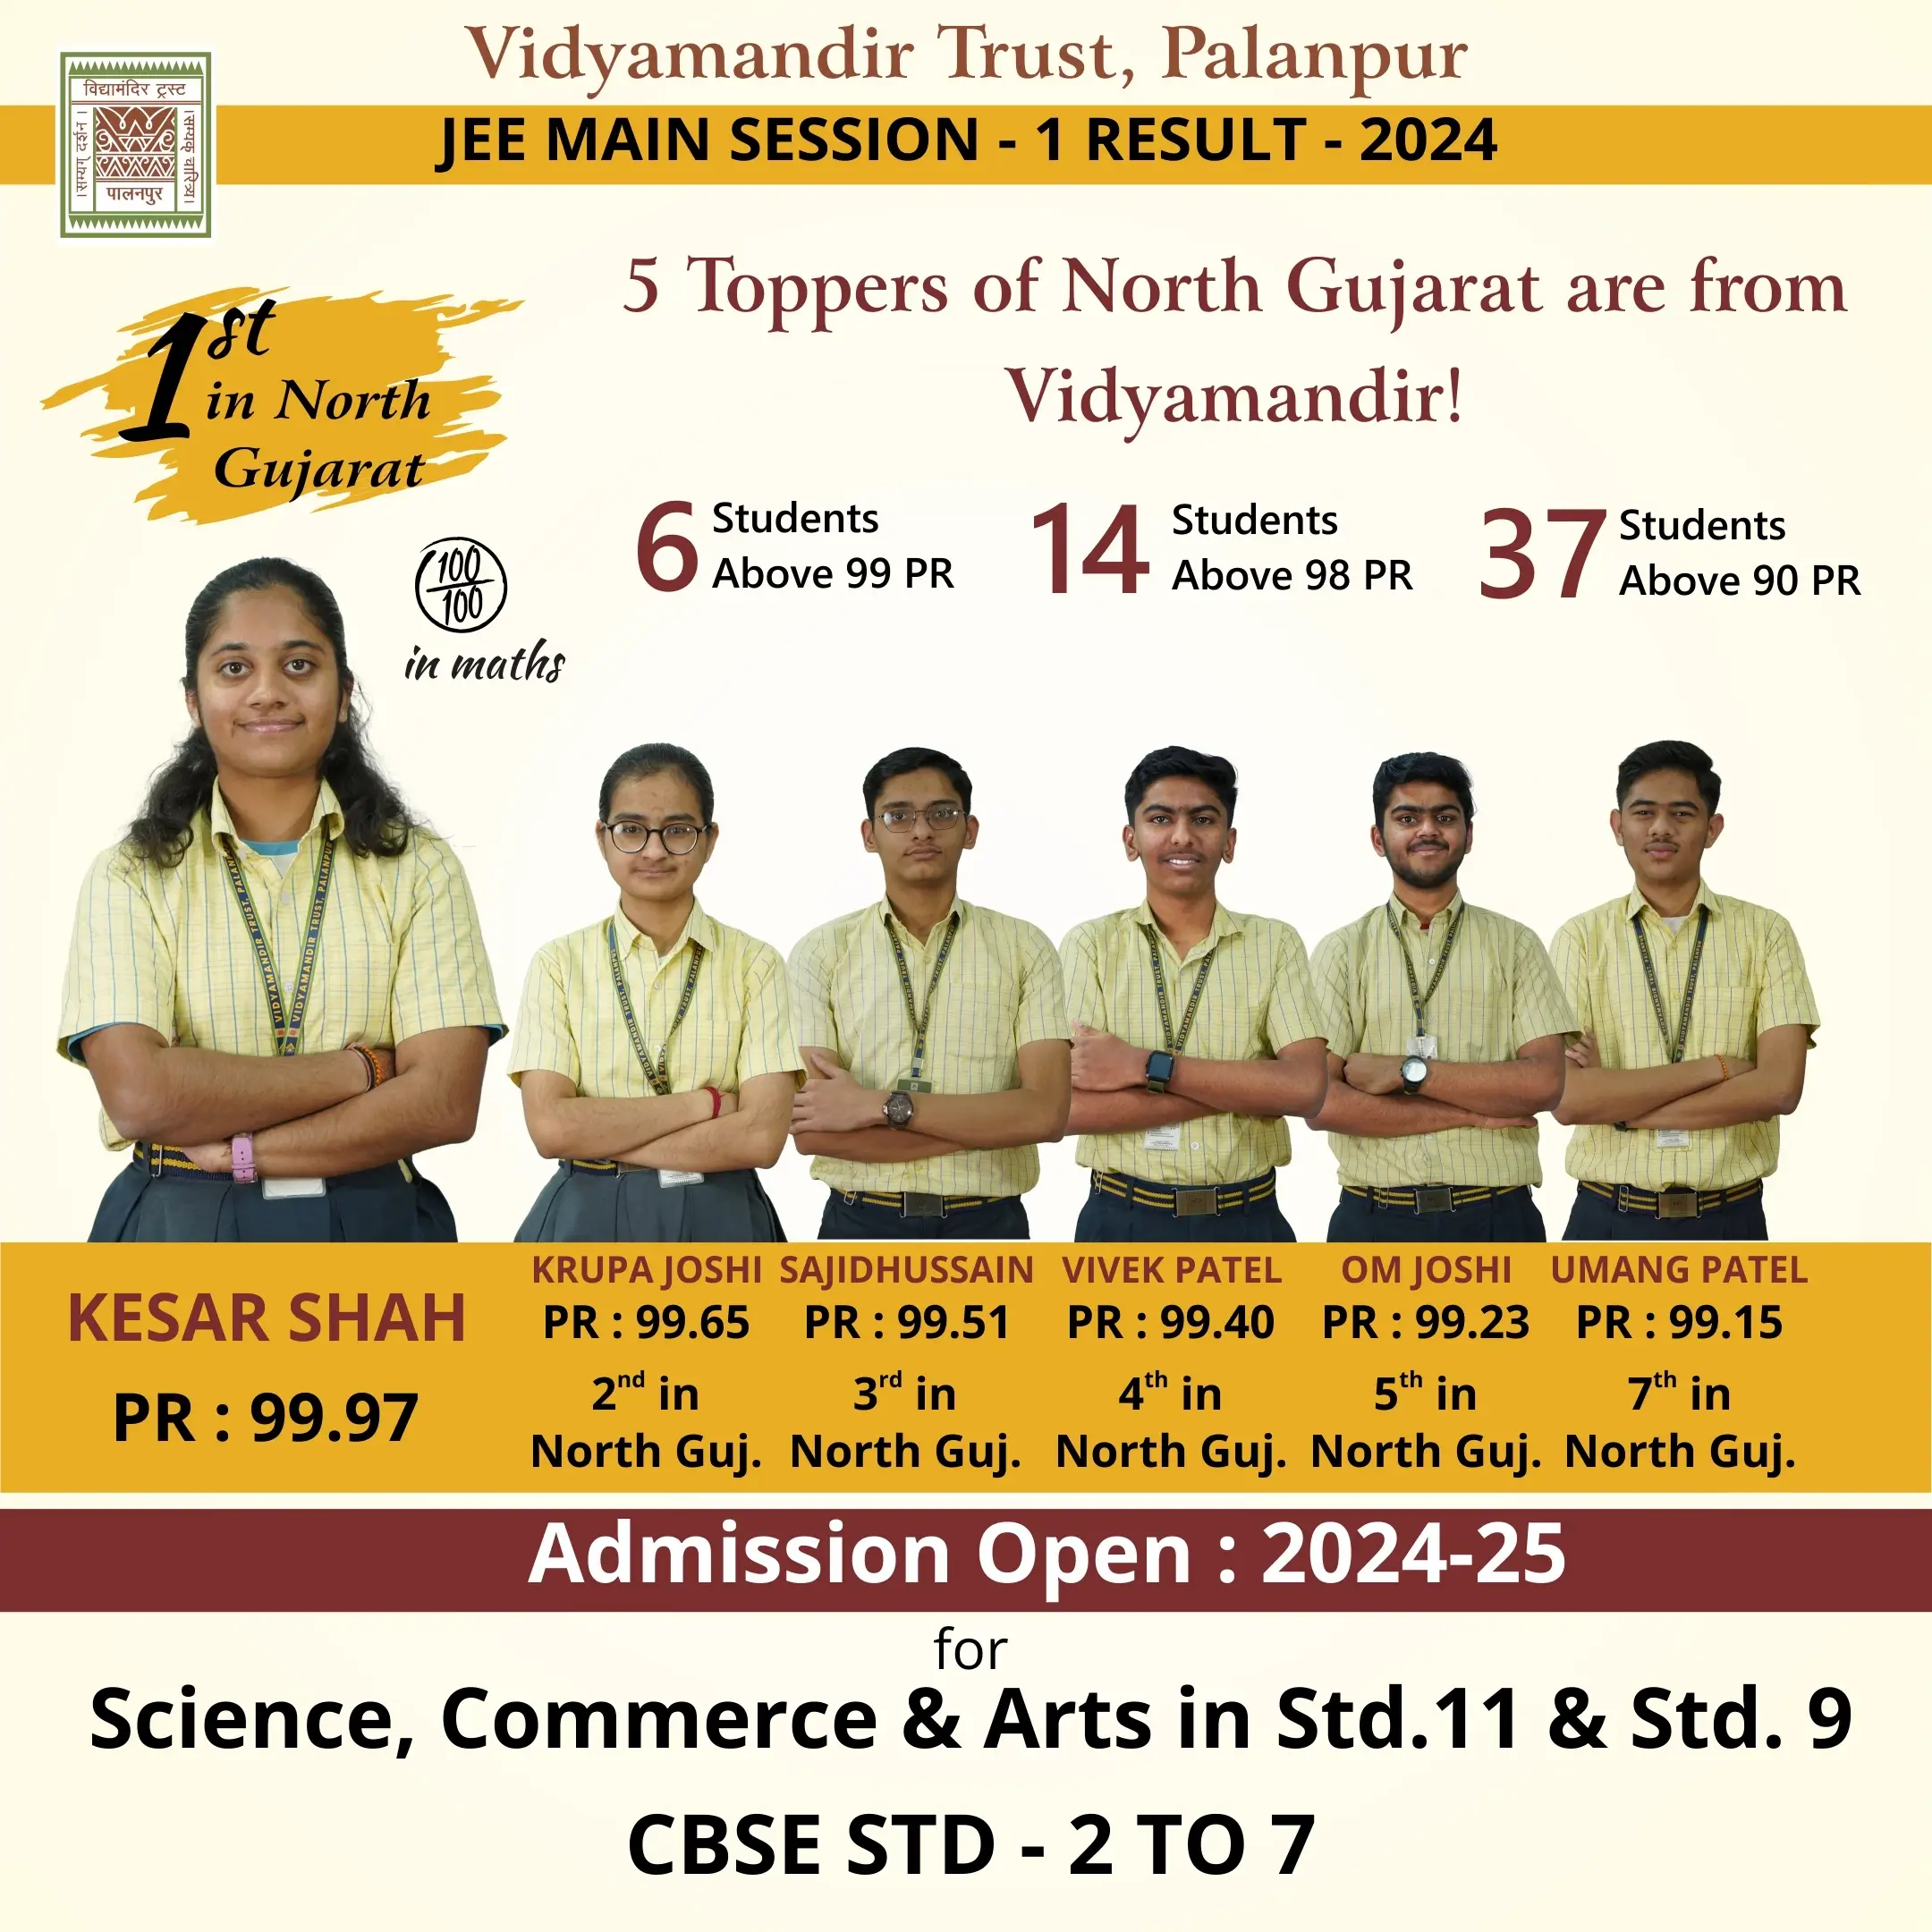 Vidyamandir Trust Palanpur, Admission Banner, Brochure for 11th Arts, commerce & Science Admission 2024, )